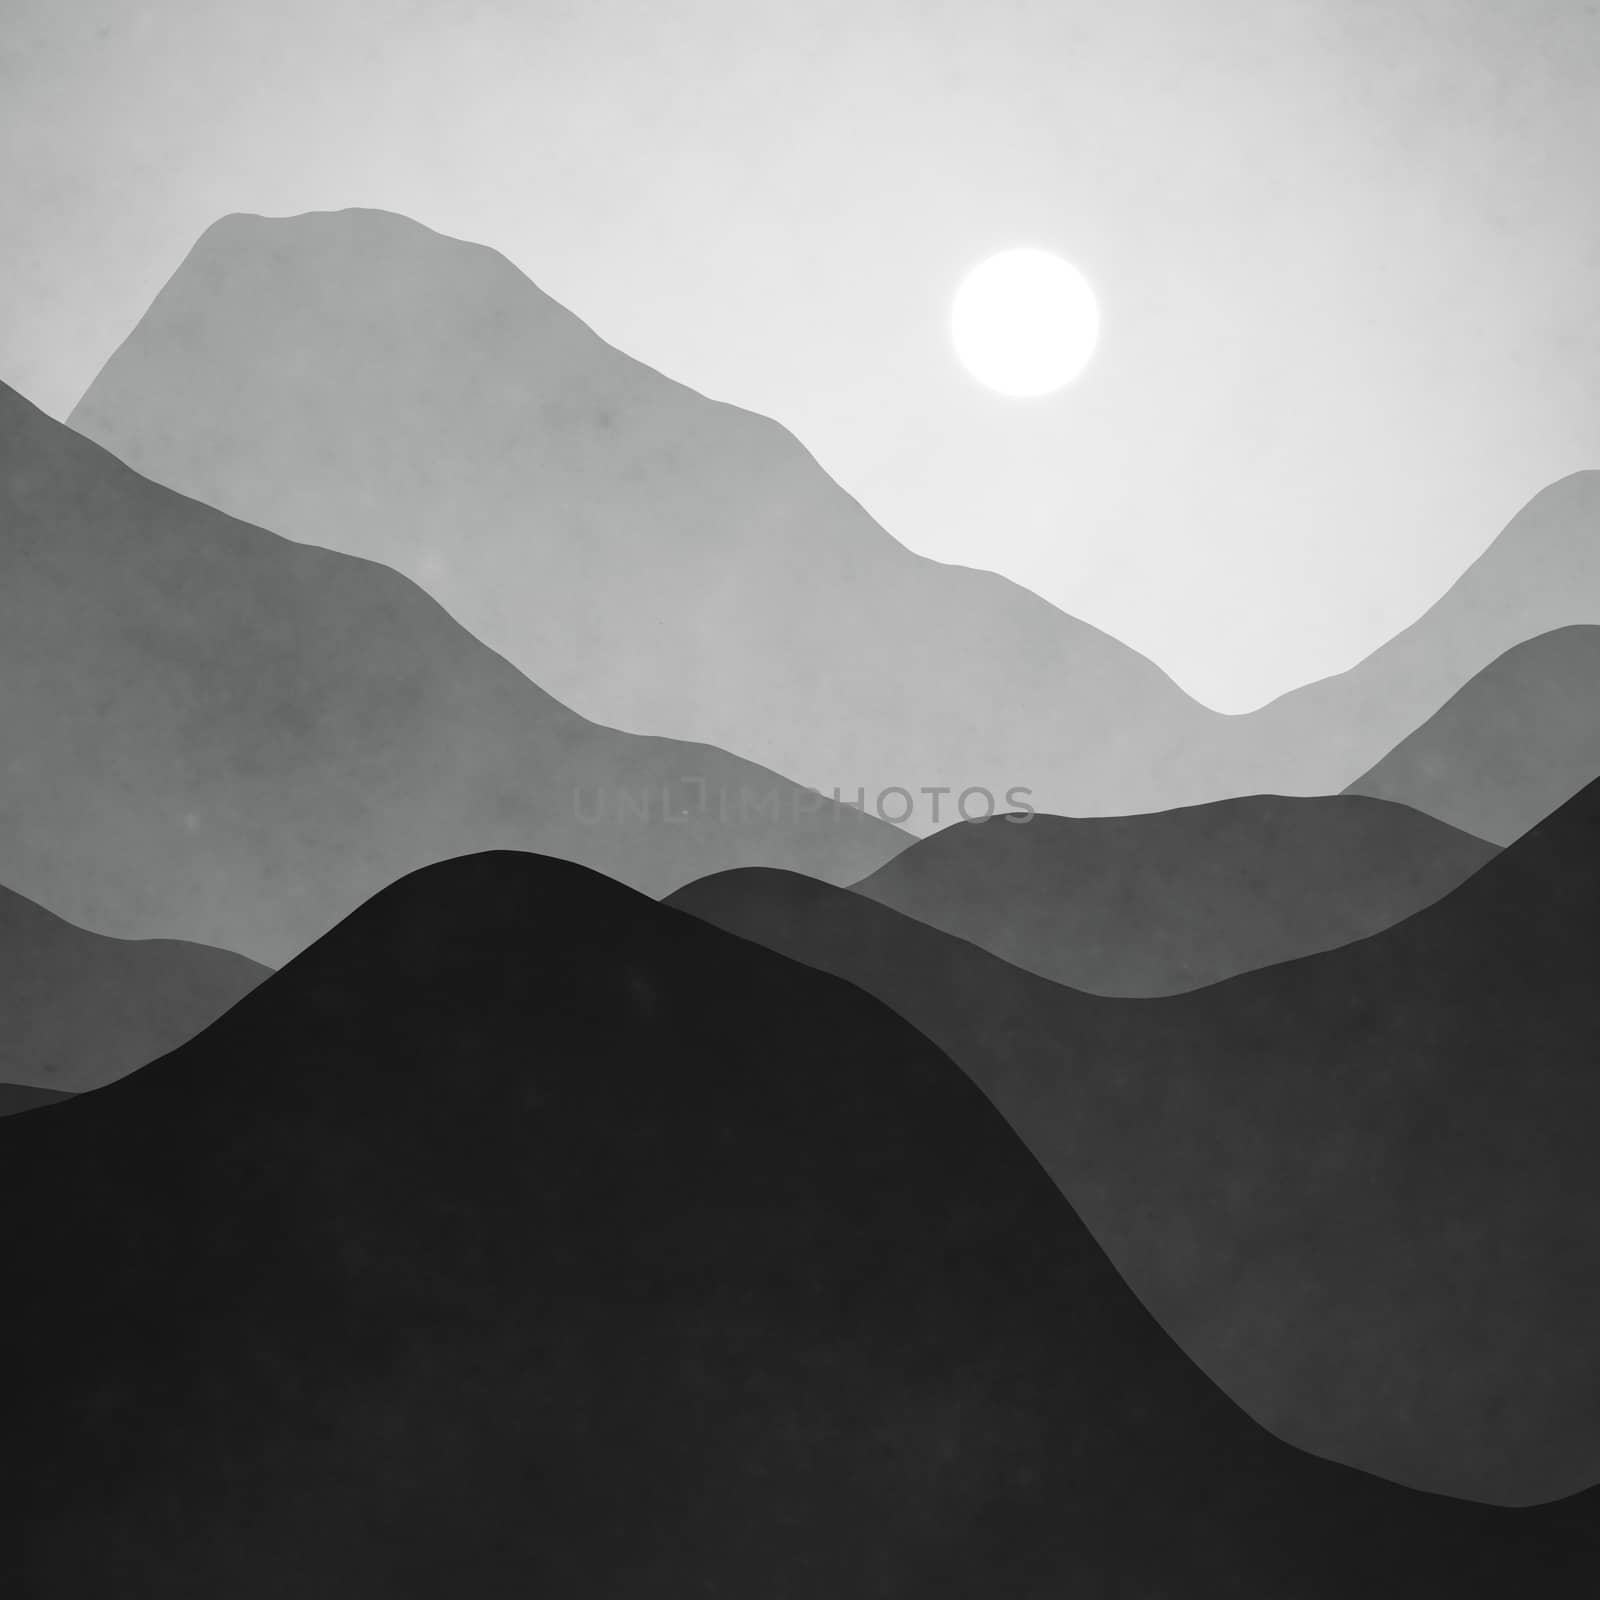 An abstract landscape background graphic with sun